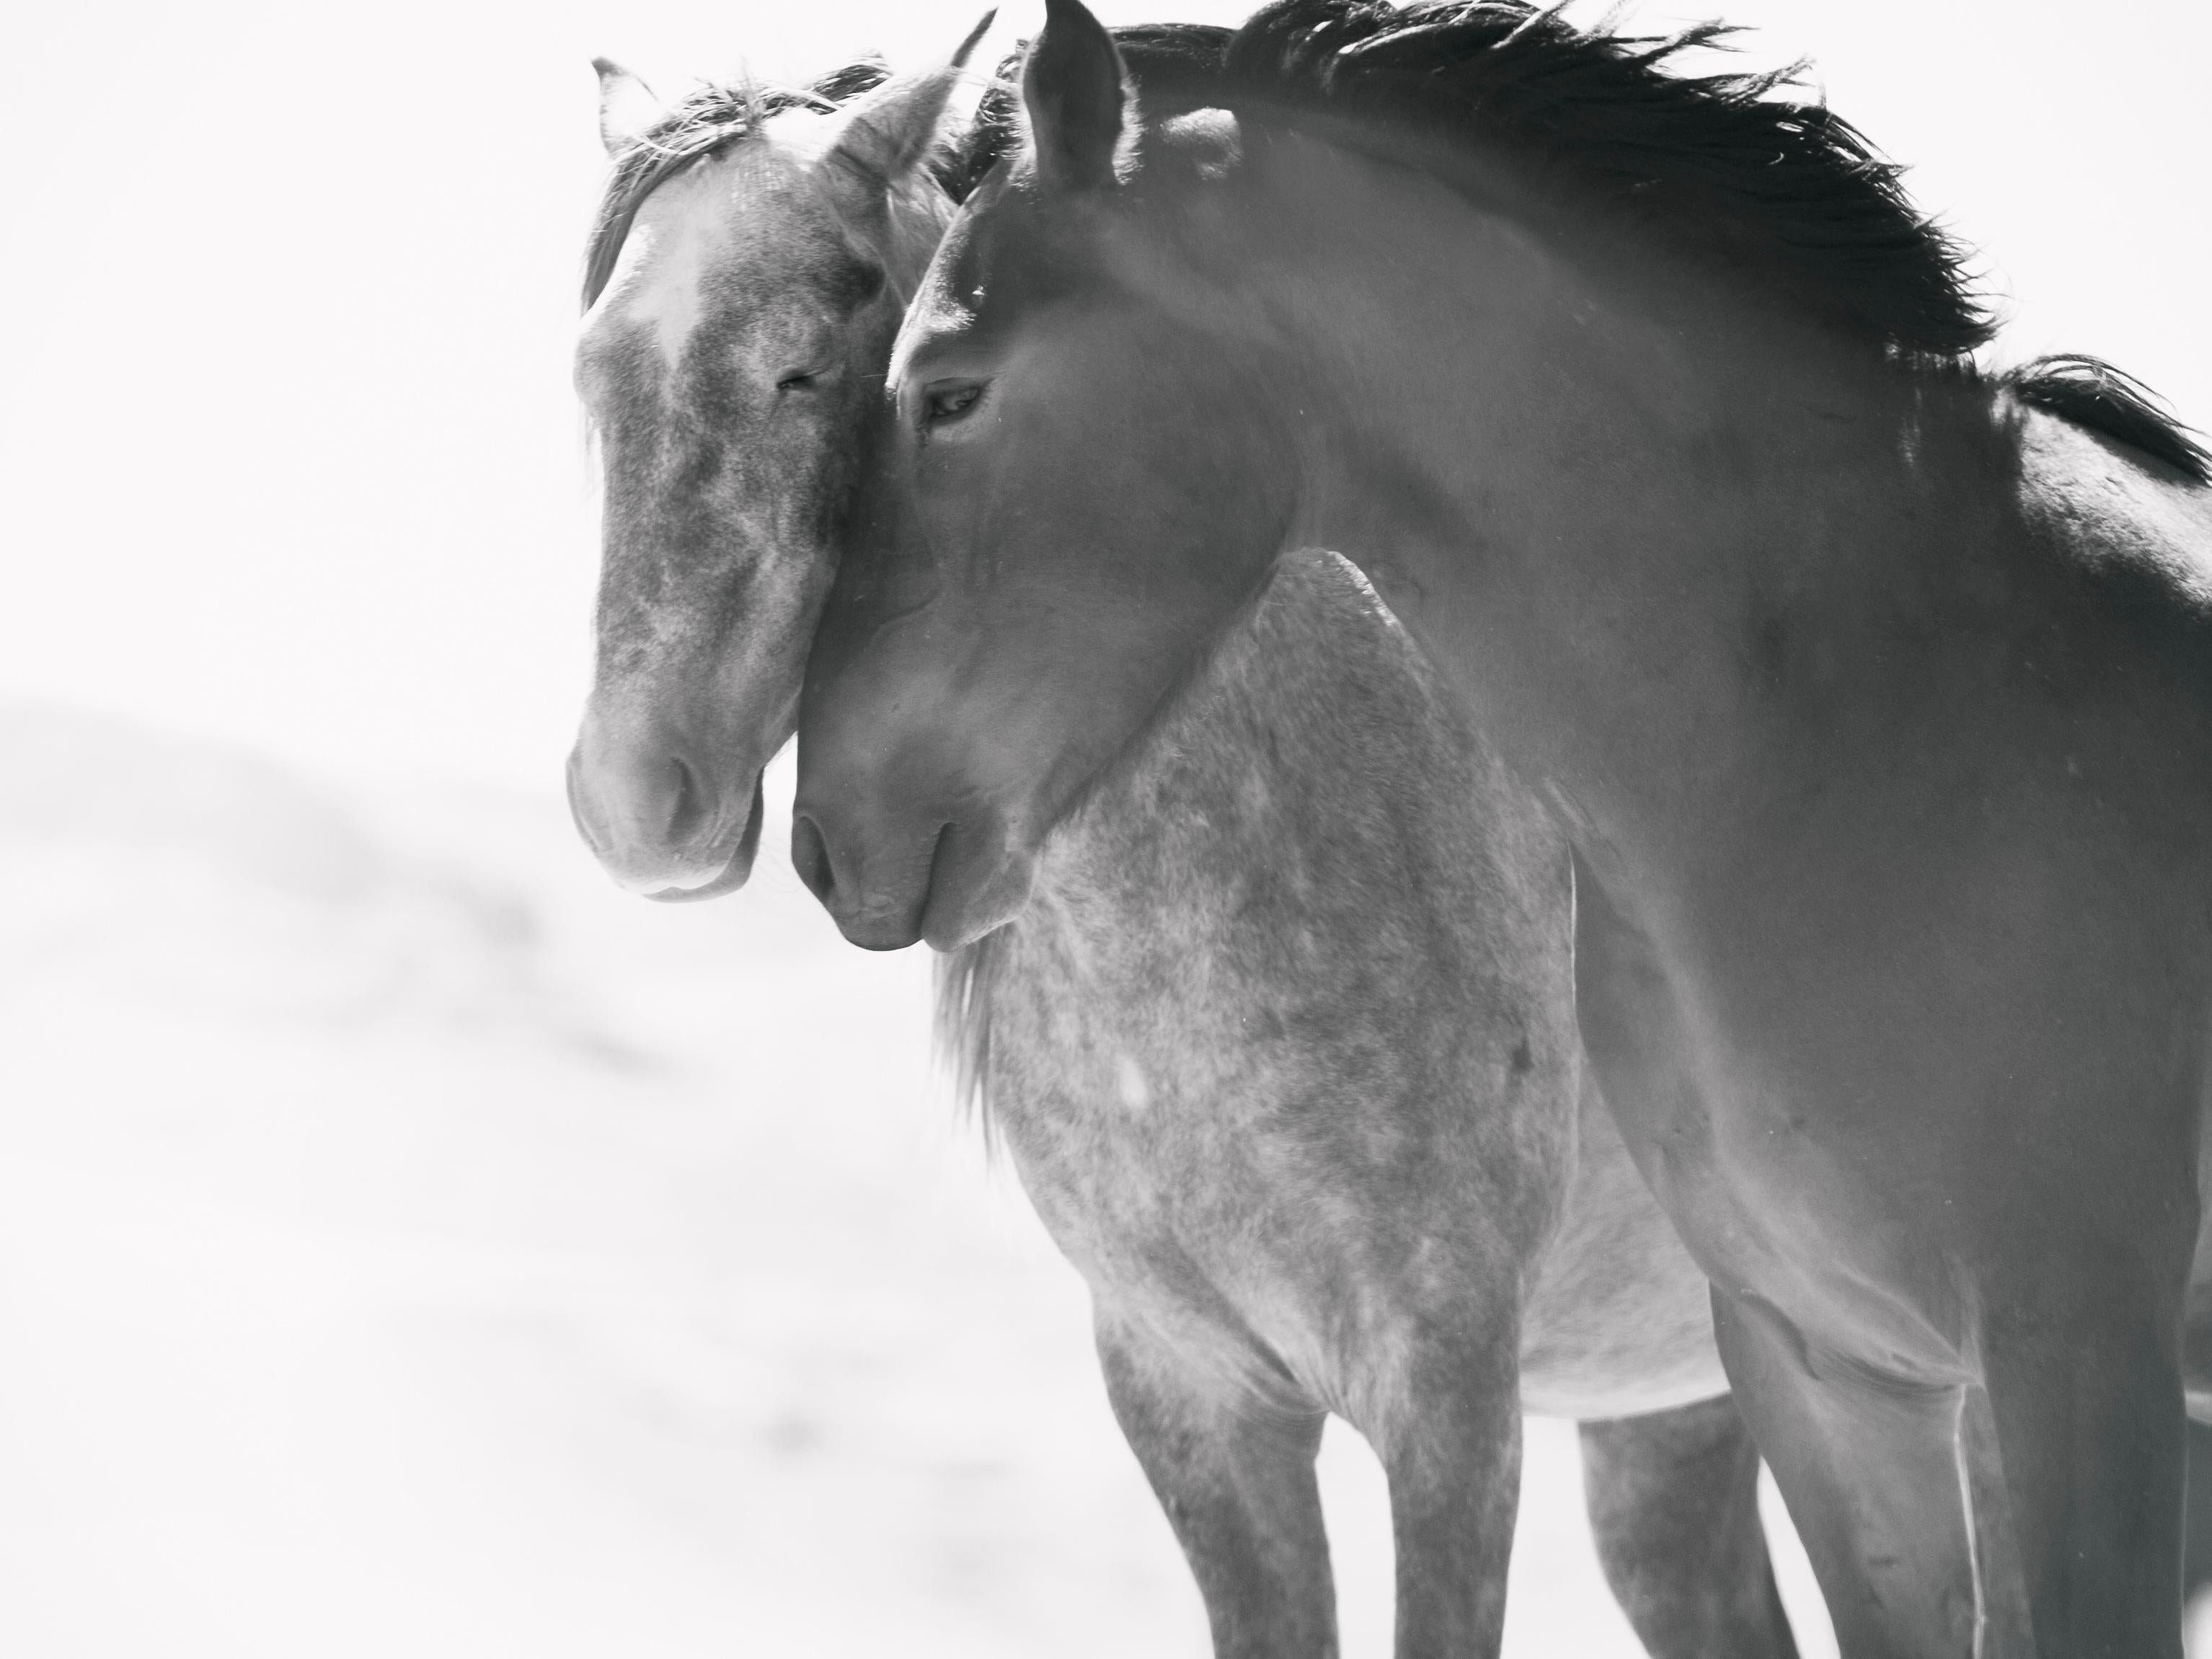 Shane Russeck Animal Print - "Soulmates" 40x60 Black and White Photography of Wild Horses Mustangs Photograph